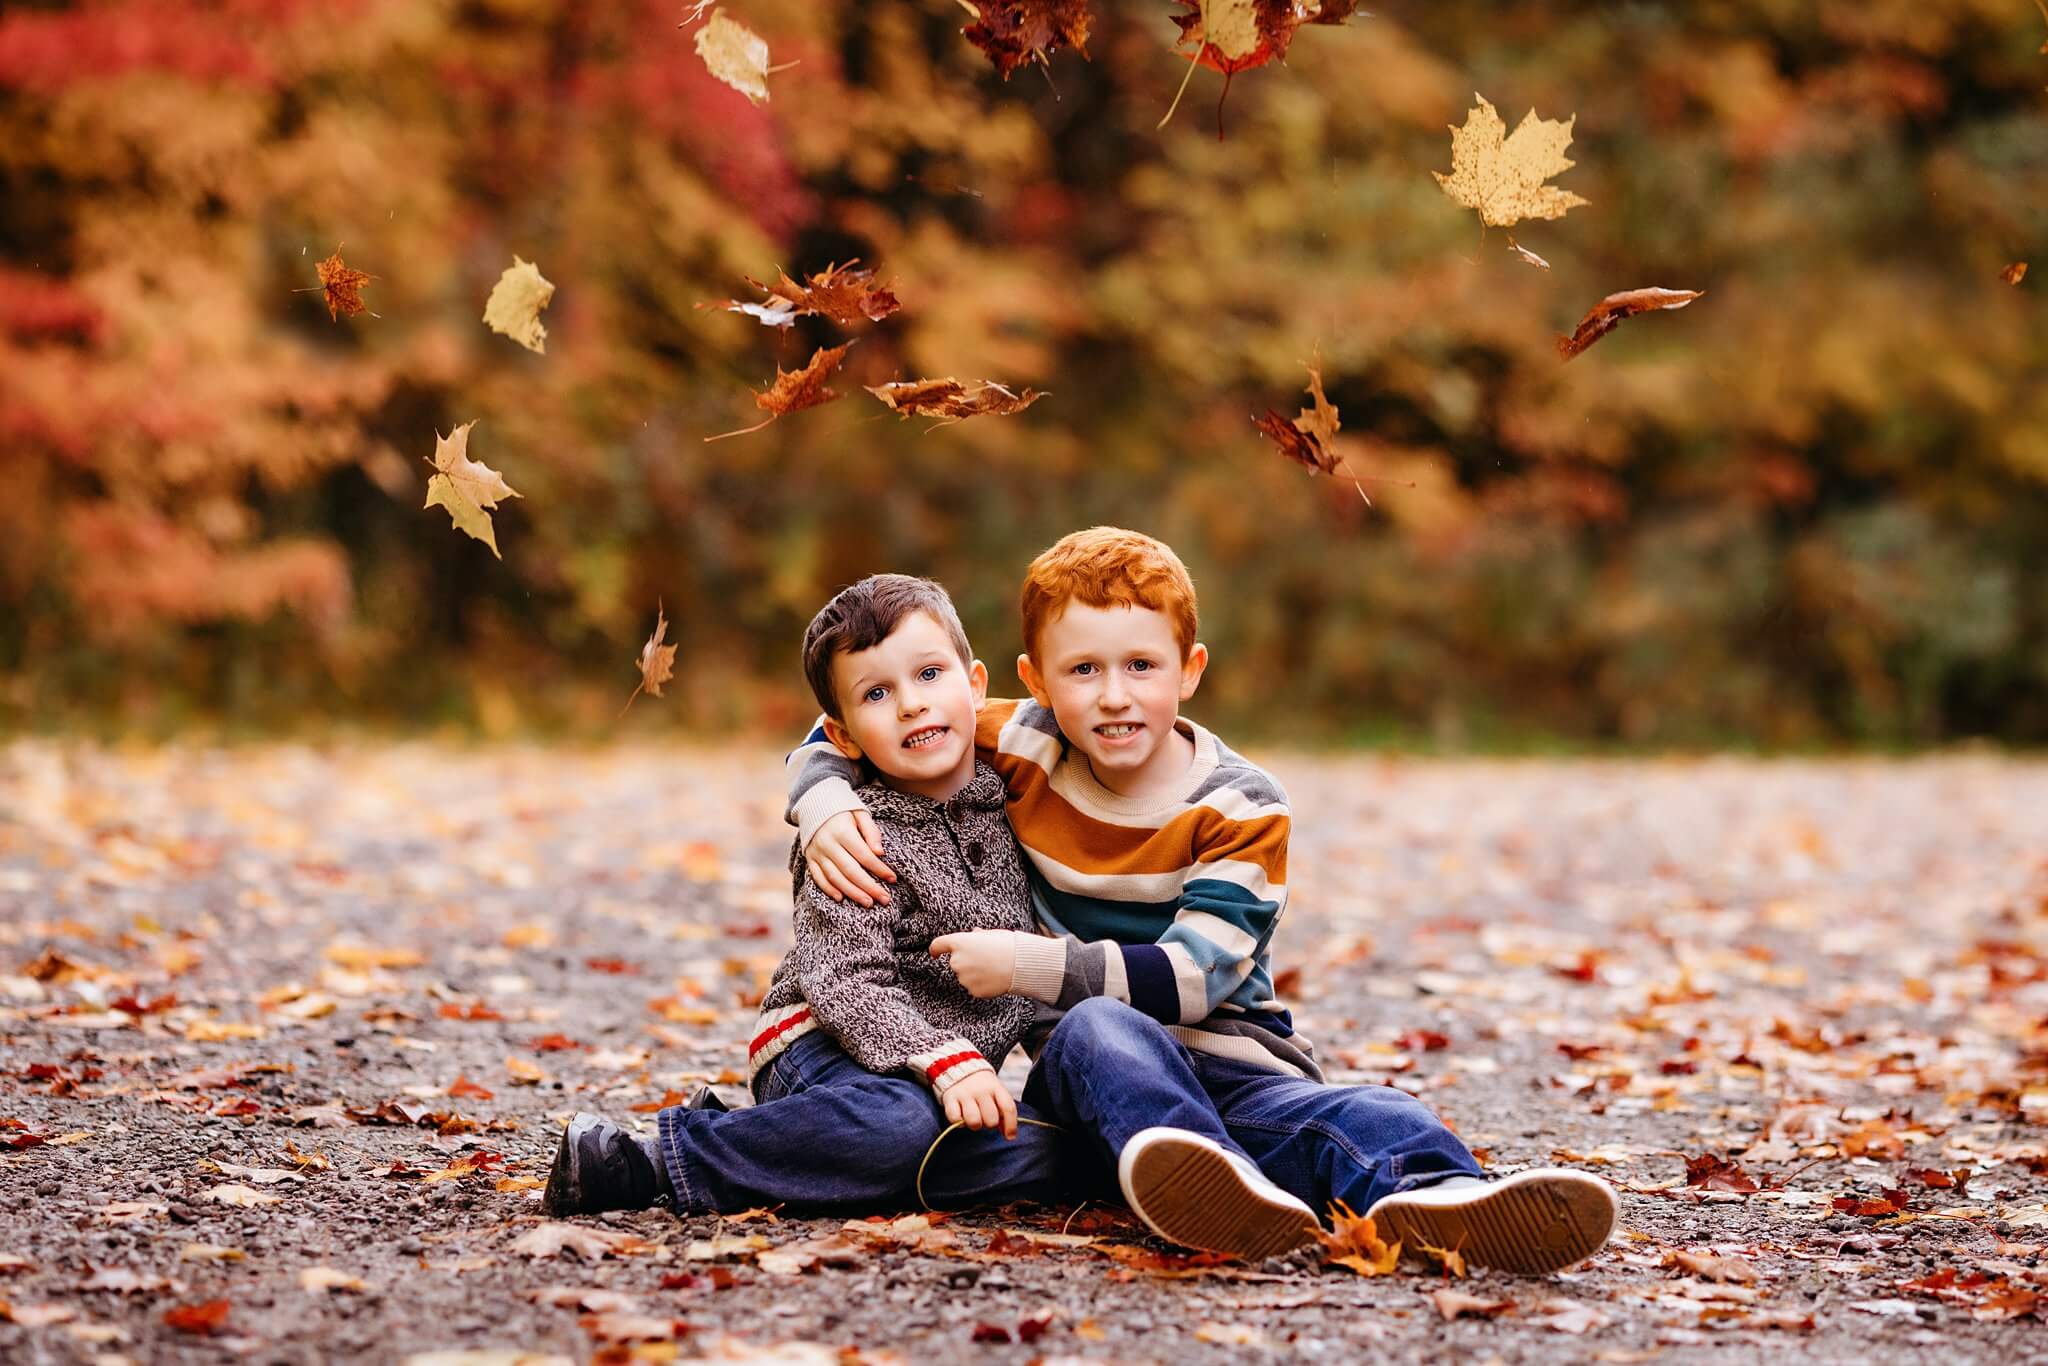 Two small boys sit amongst leaves with leaves falling around them